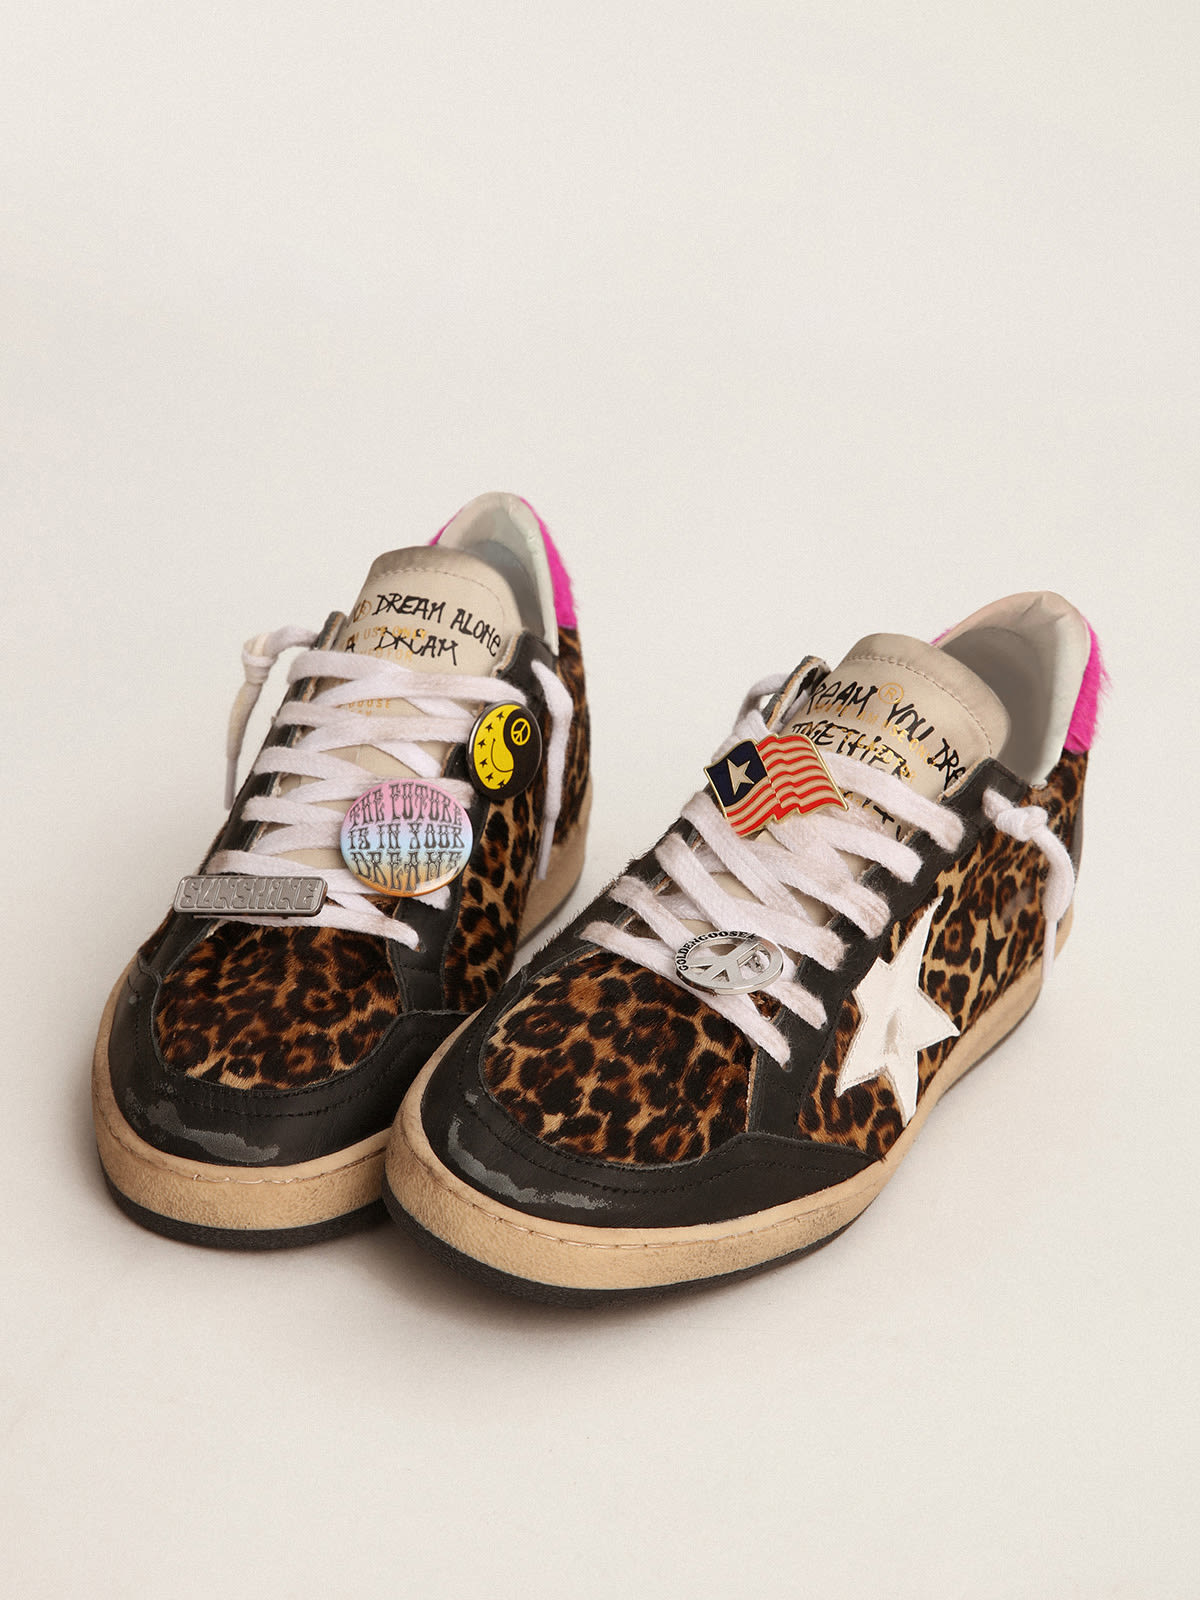 Ball Star sneakers in leopard-print pony skin with a white leather star and  multicolored pins | Golden Goose